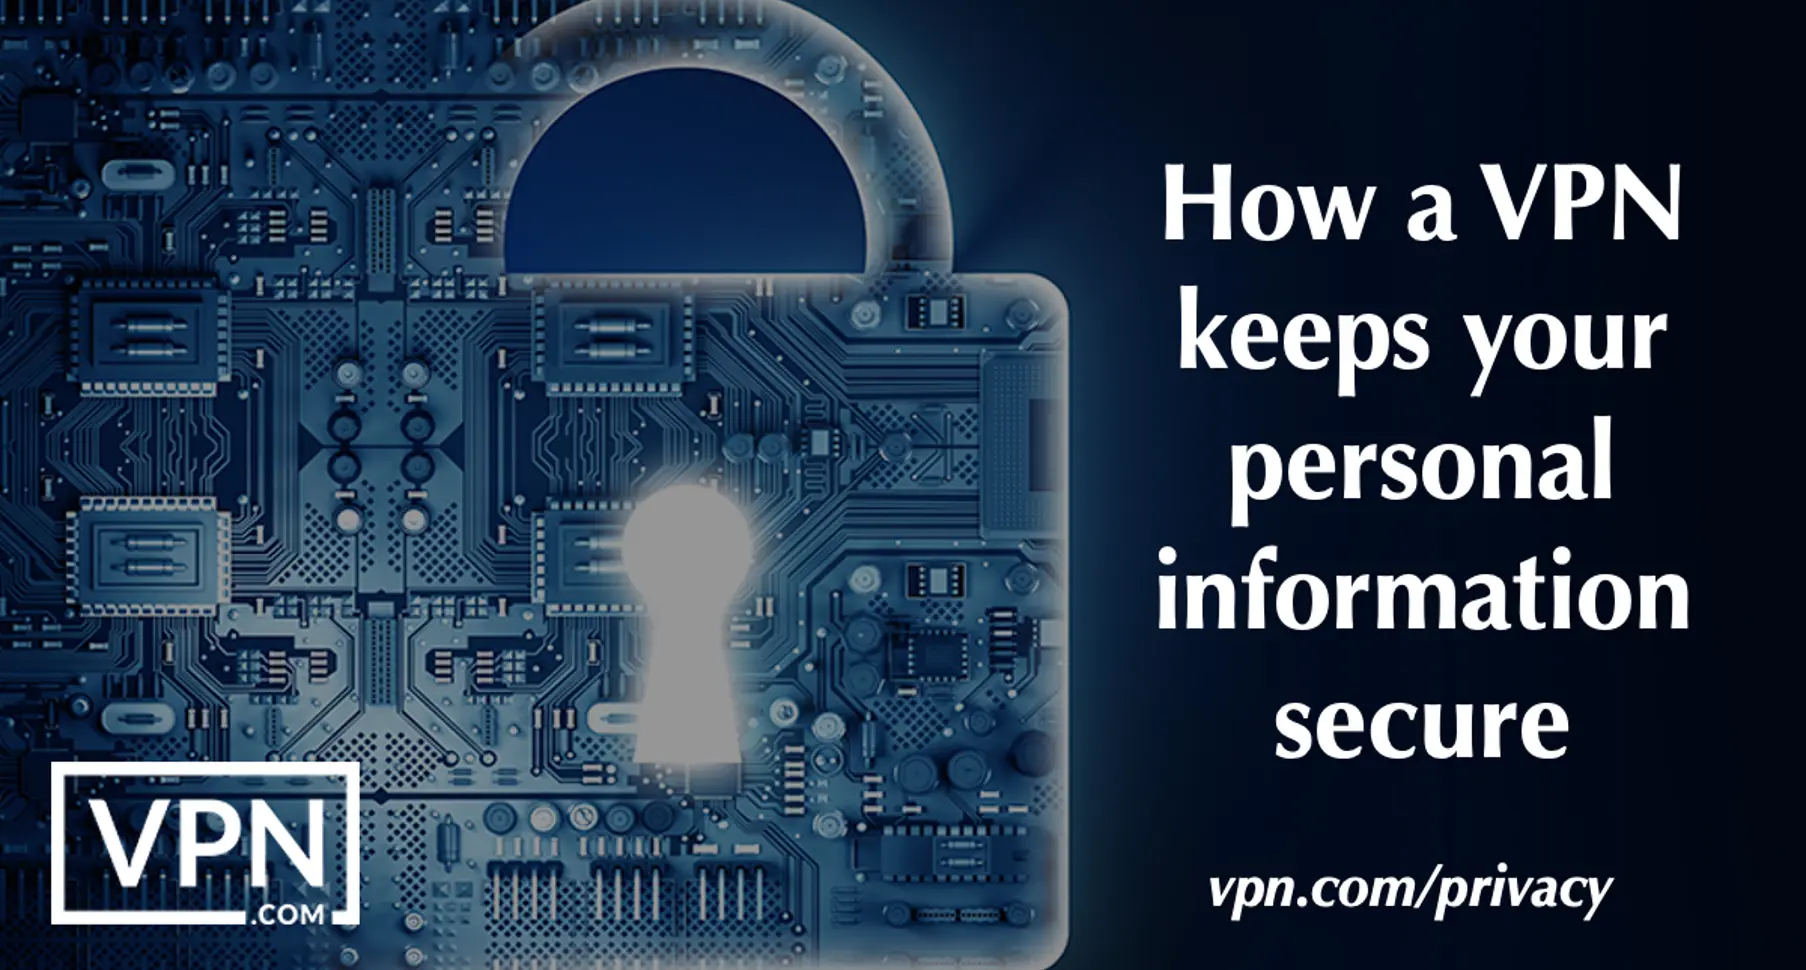 How a VPN for privacy keeps your personal information secure.